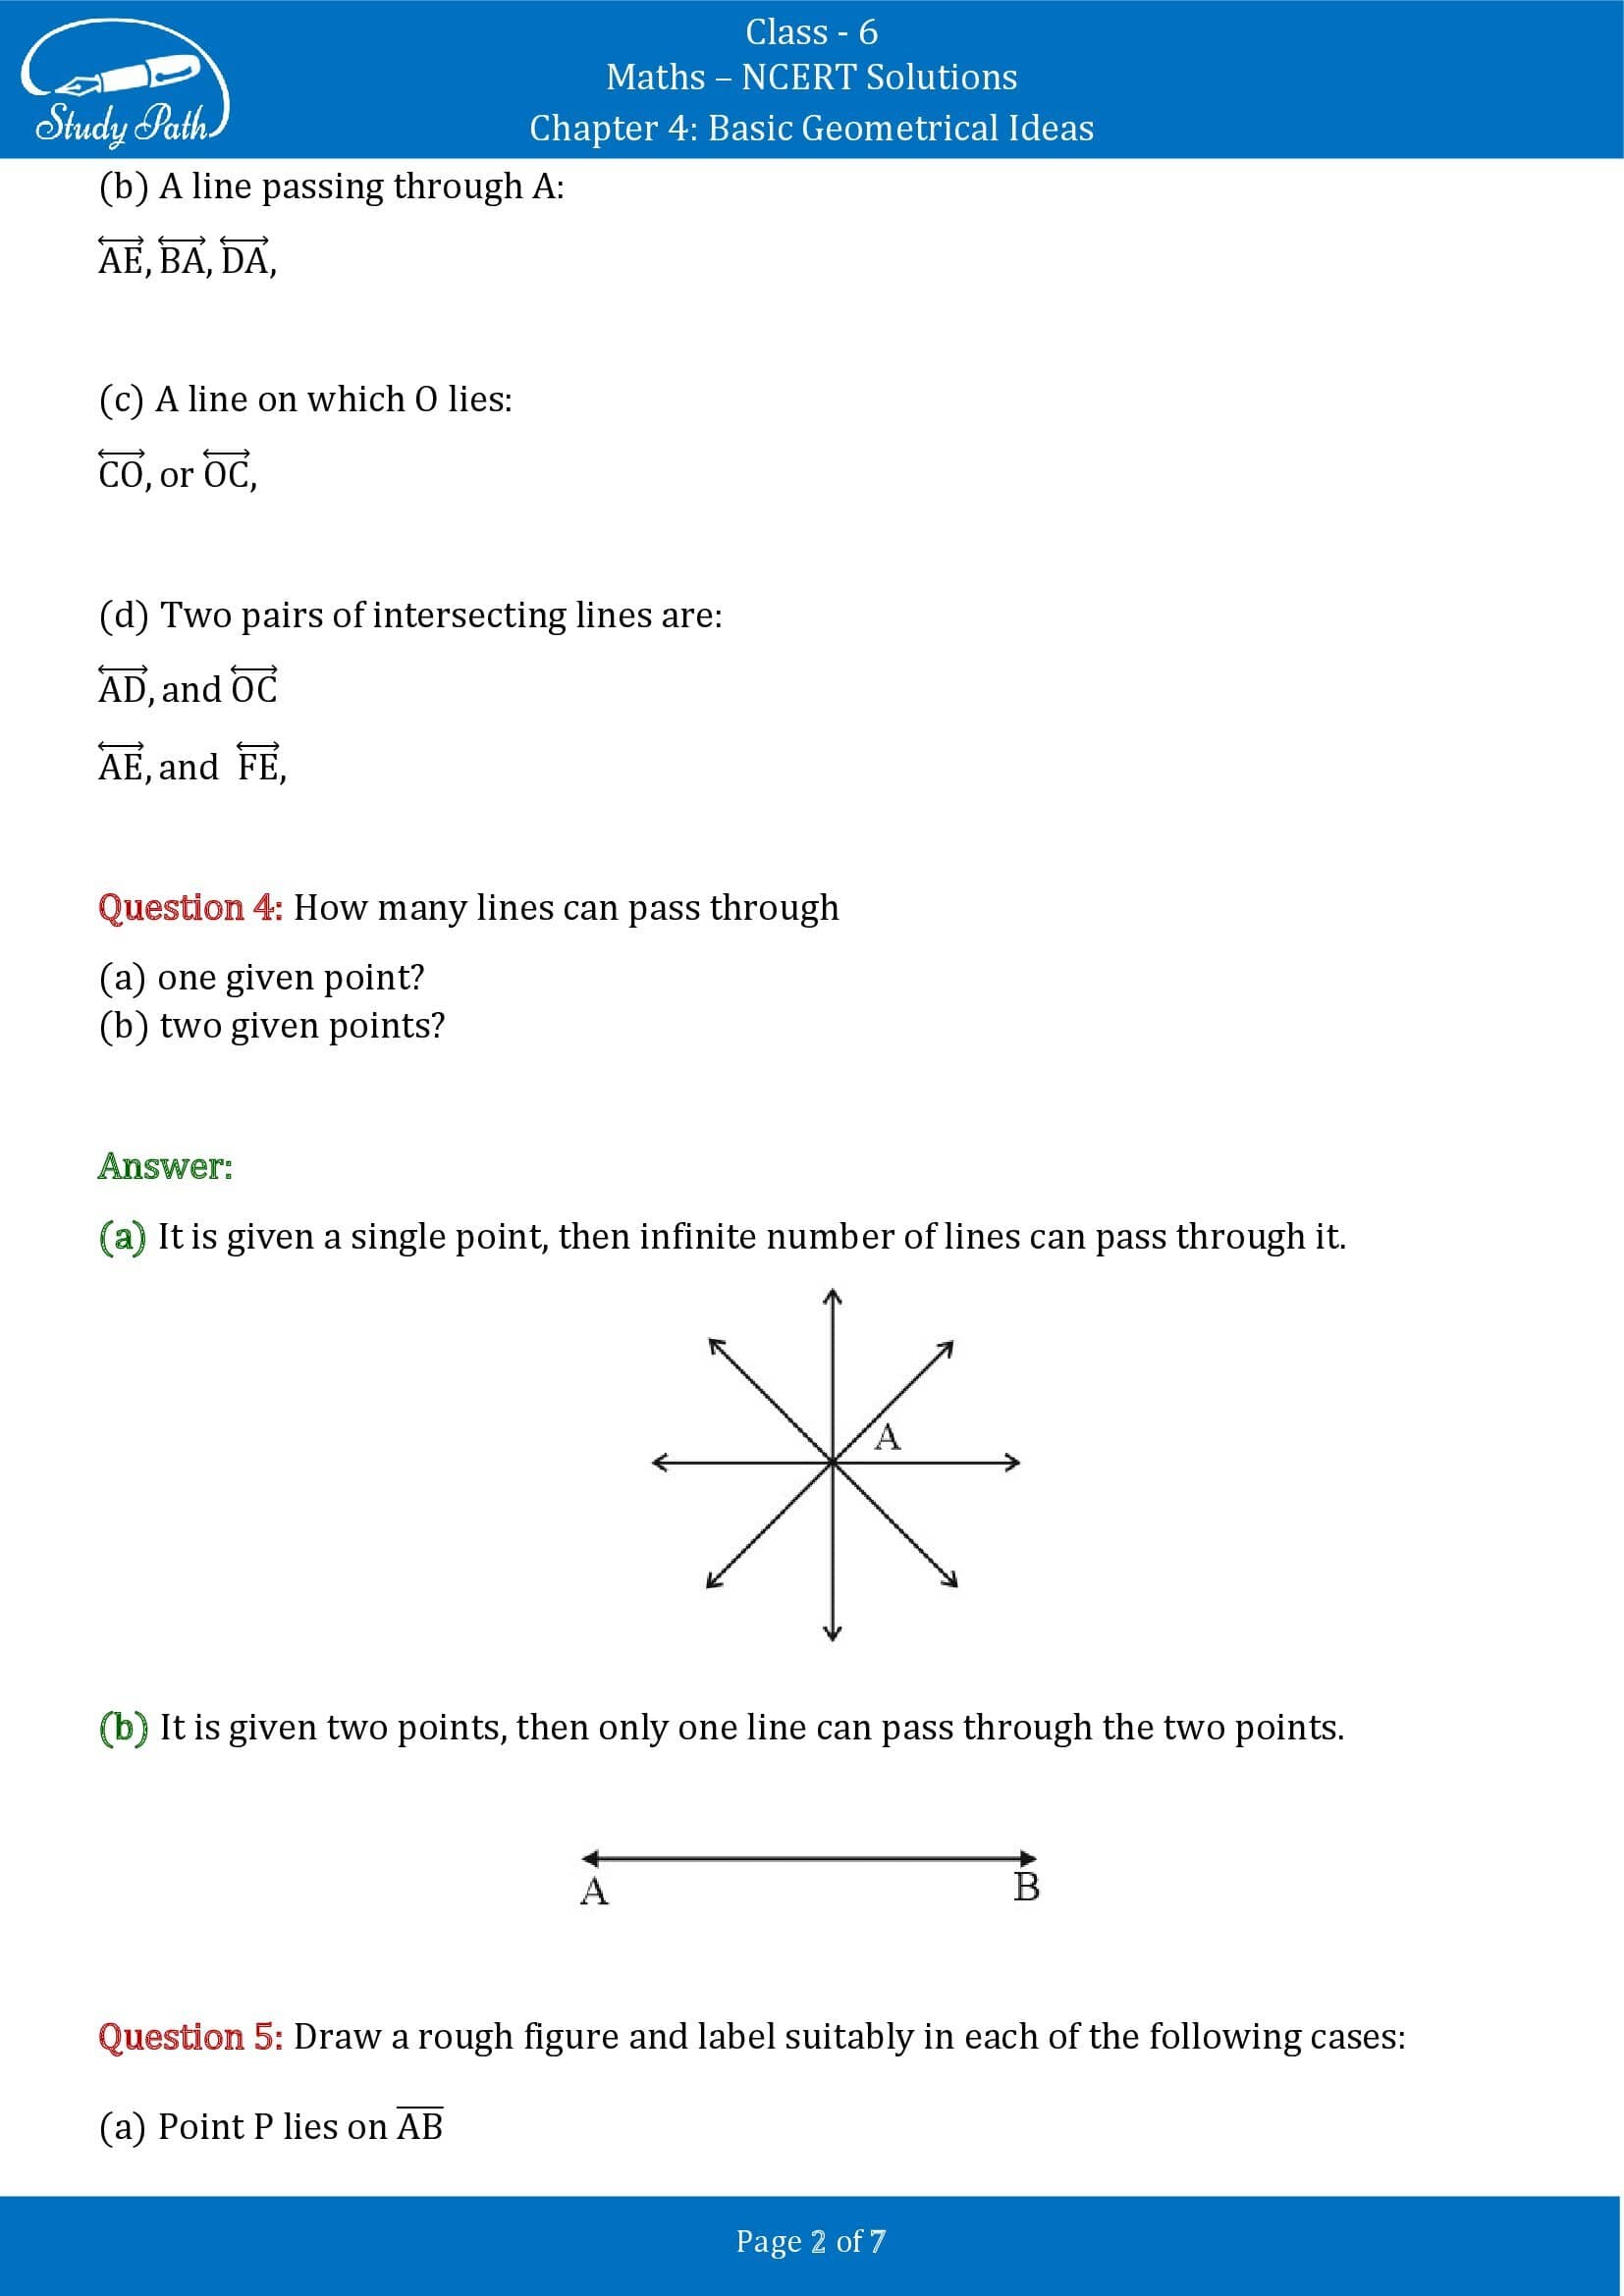 NCERT Solutions for Class 6 Maths Chapter 4 Basic Geometrical Ideas Exercise 4.1 00002